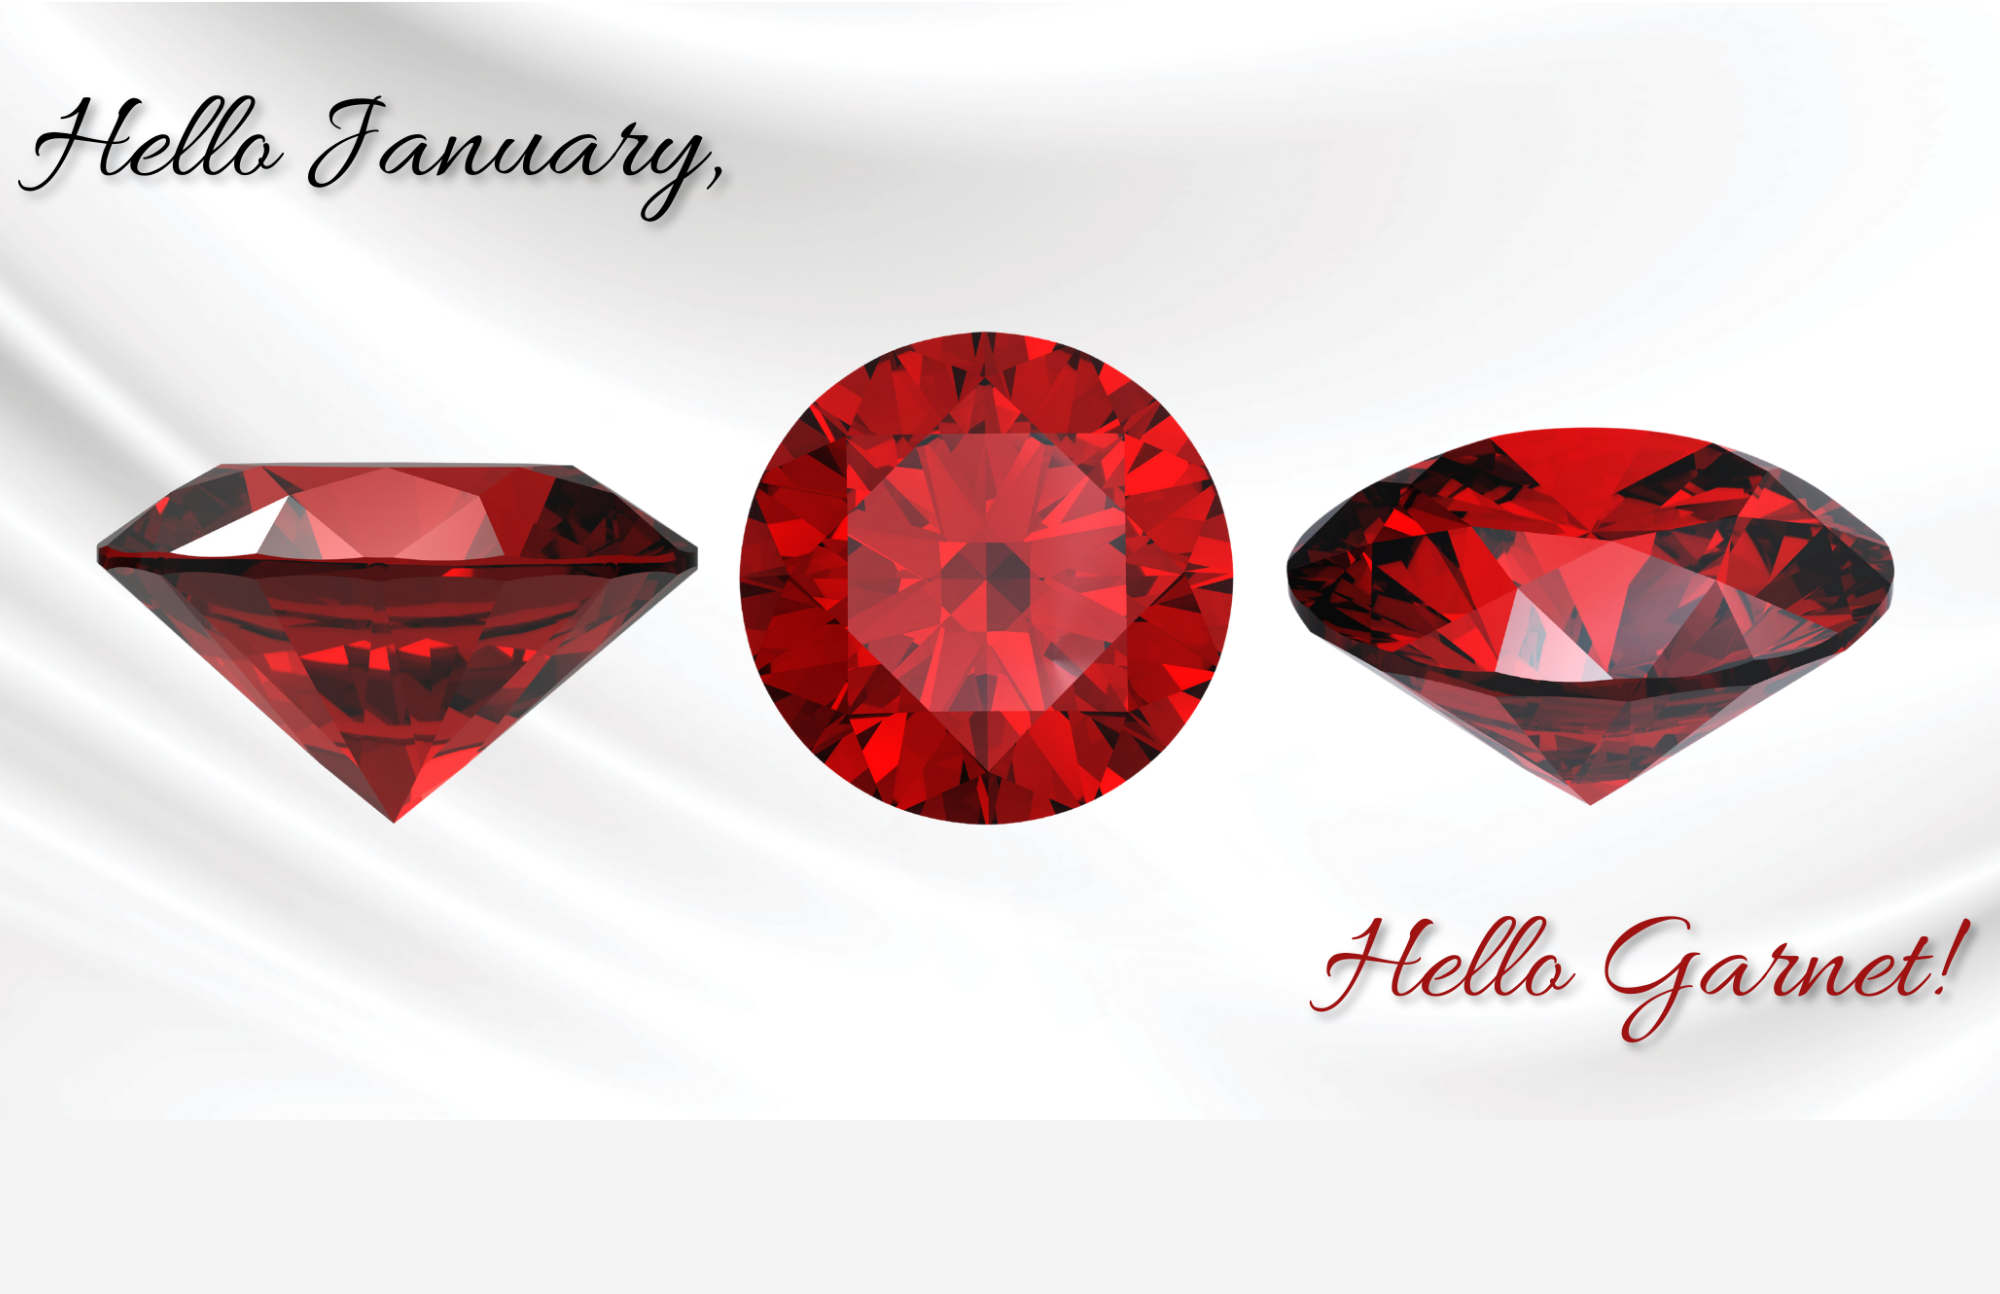 January Gemstone - Explore About The Red Stone That Is Right For You